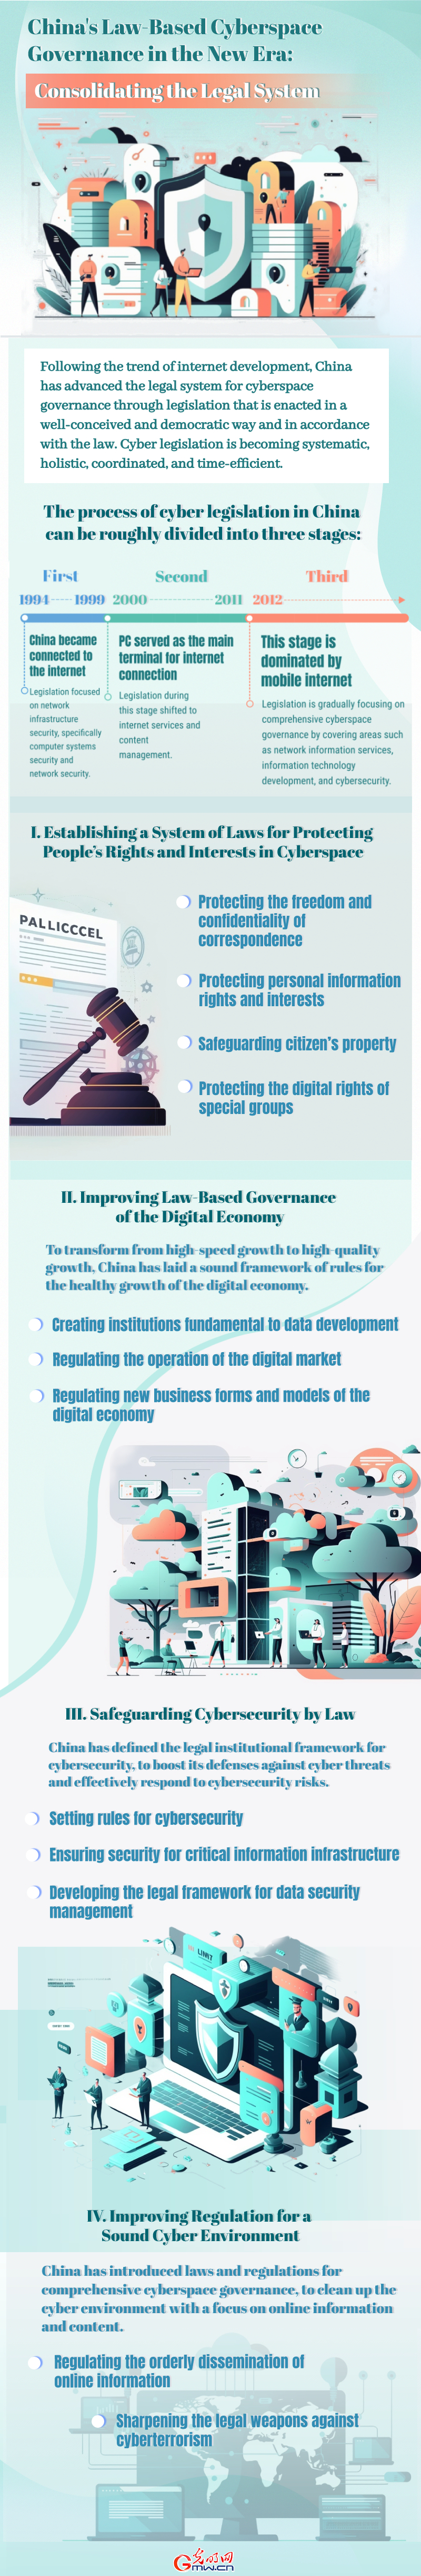 China's Law-Based Cyberspace Governance in the New Era: Consolidating the Legal System